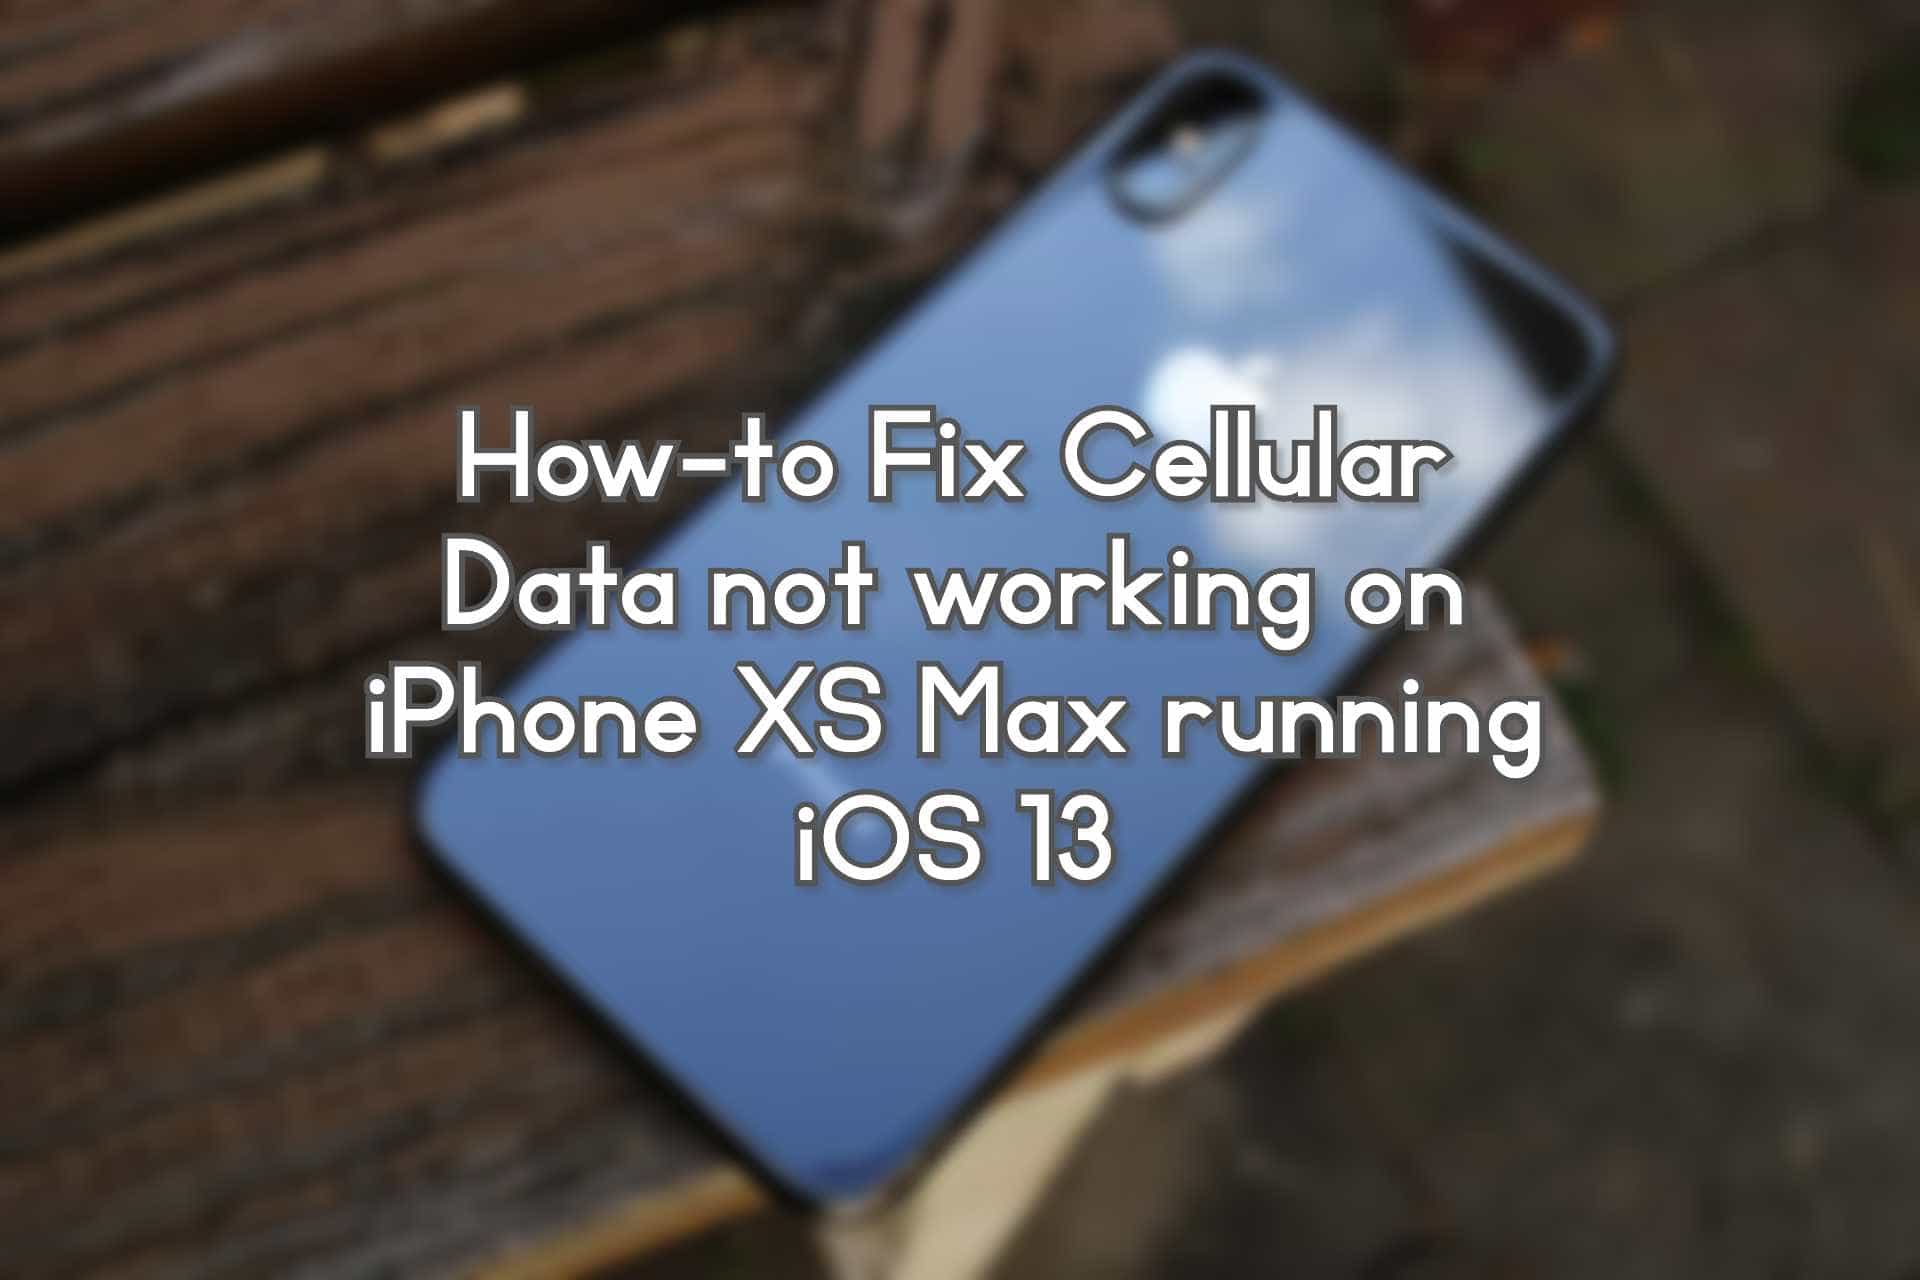 Cellular Data not working on iPhone XS Max running iOS 13 ... - 